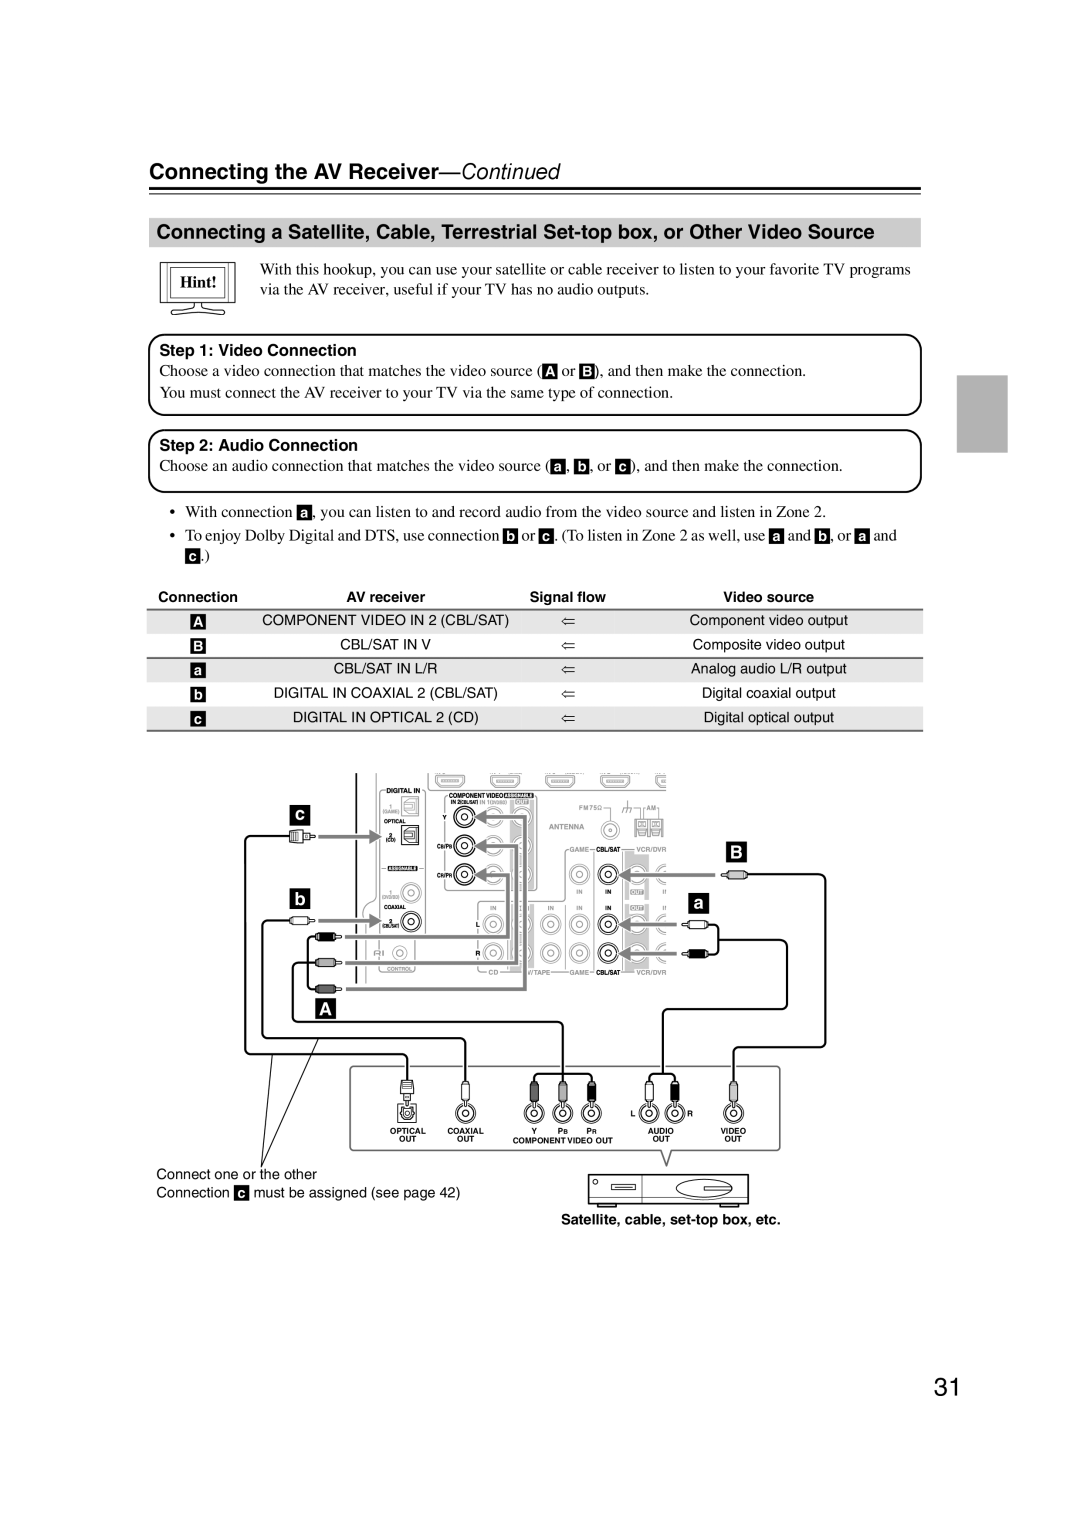 Onkyo SR607 instruction manual Connecting the AV Receiver—Continued, c b A, Hint, Satellite, cable, set-topbox, etc 